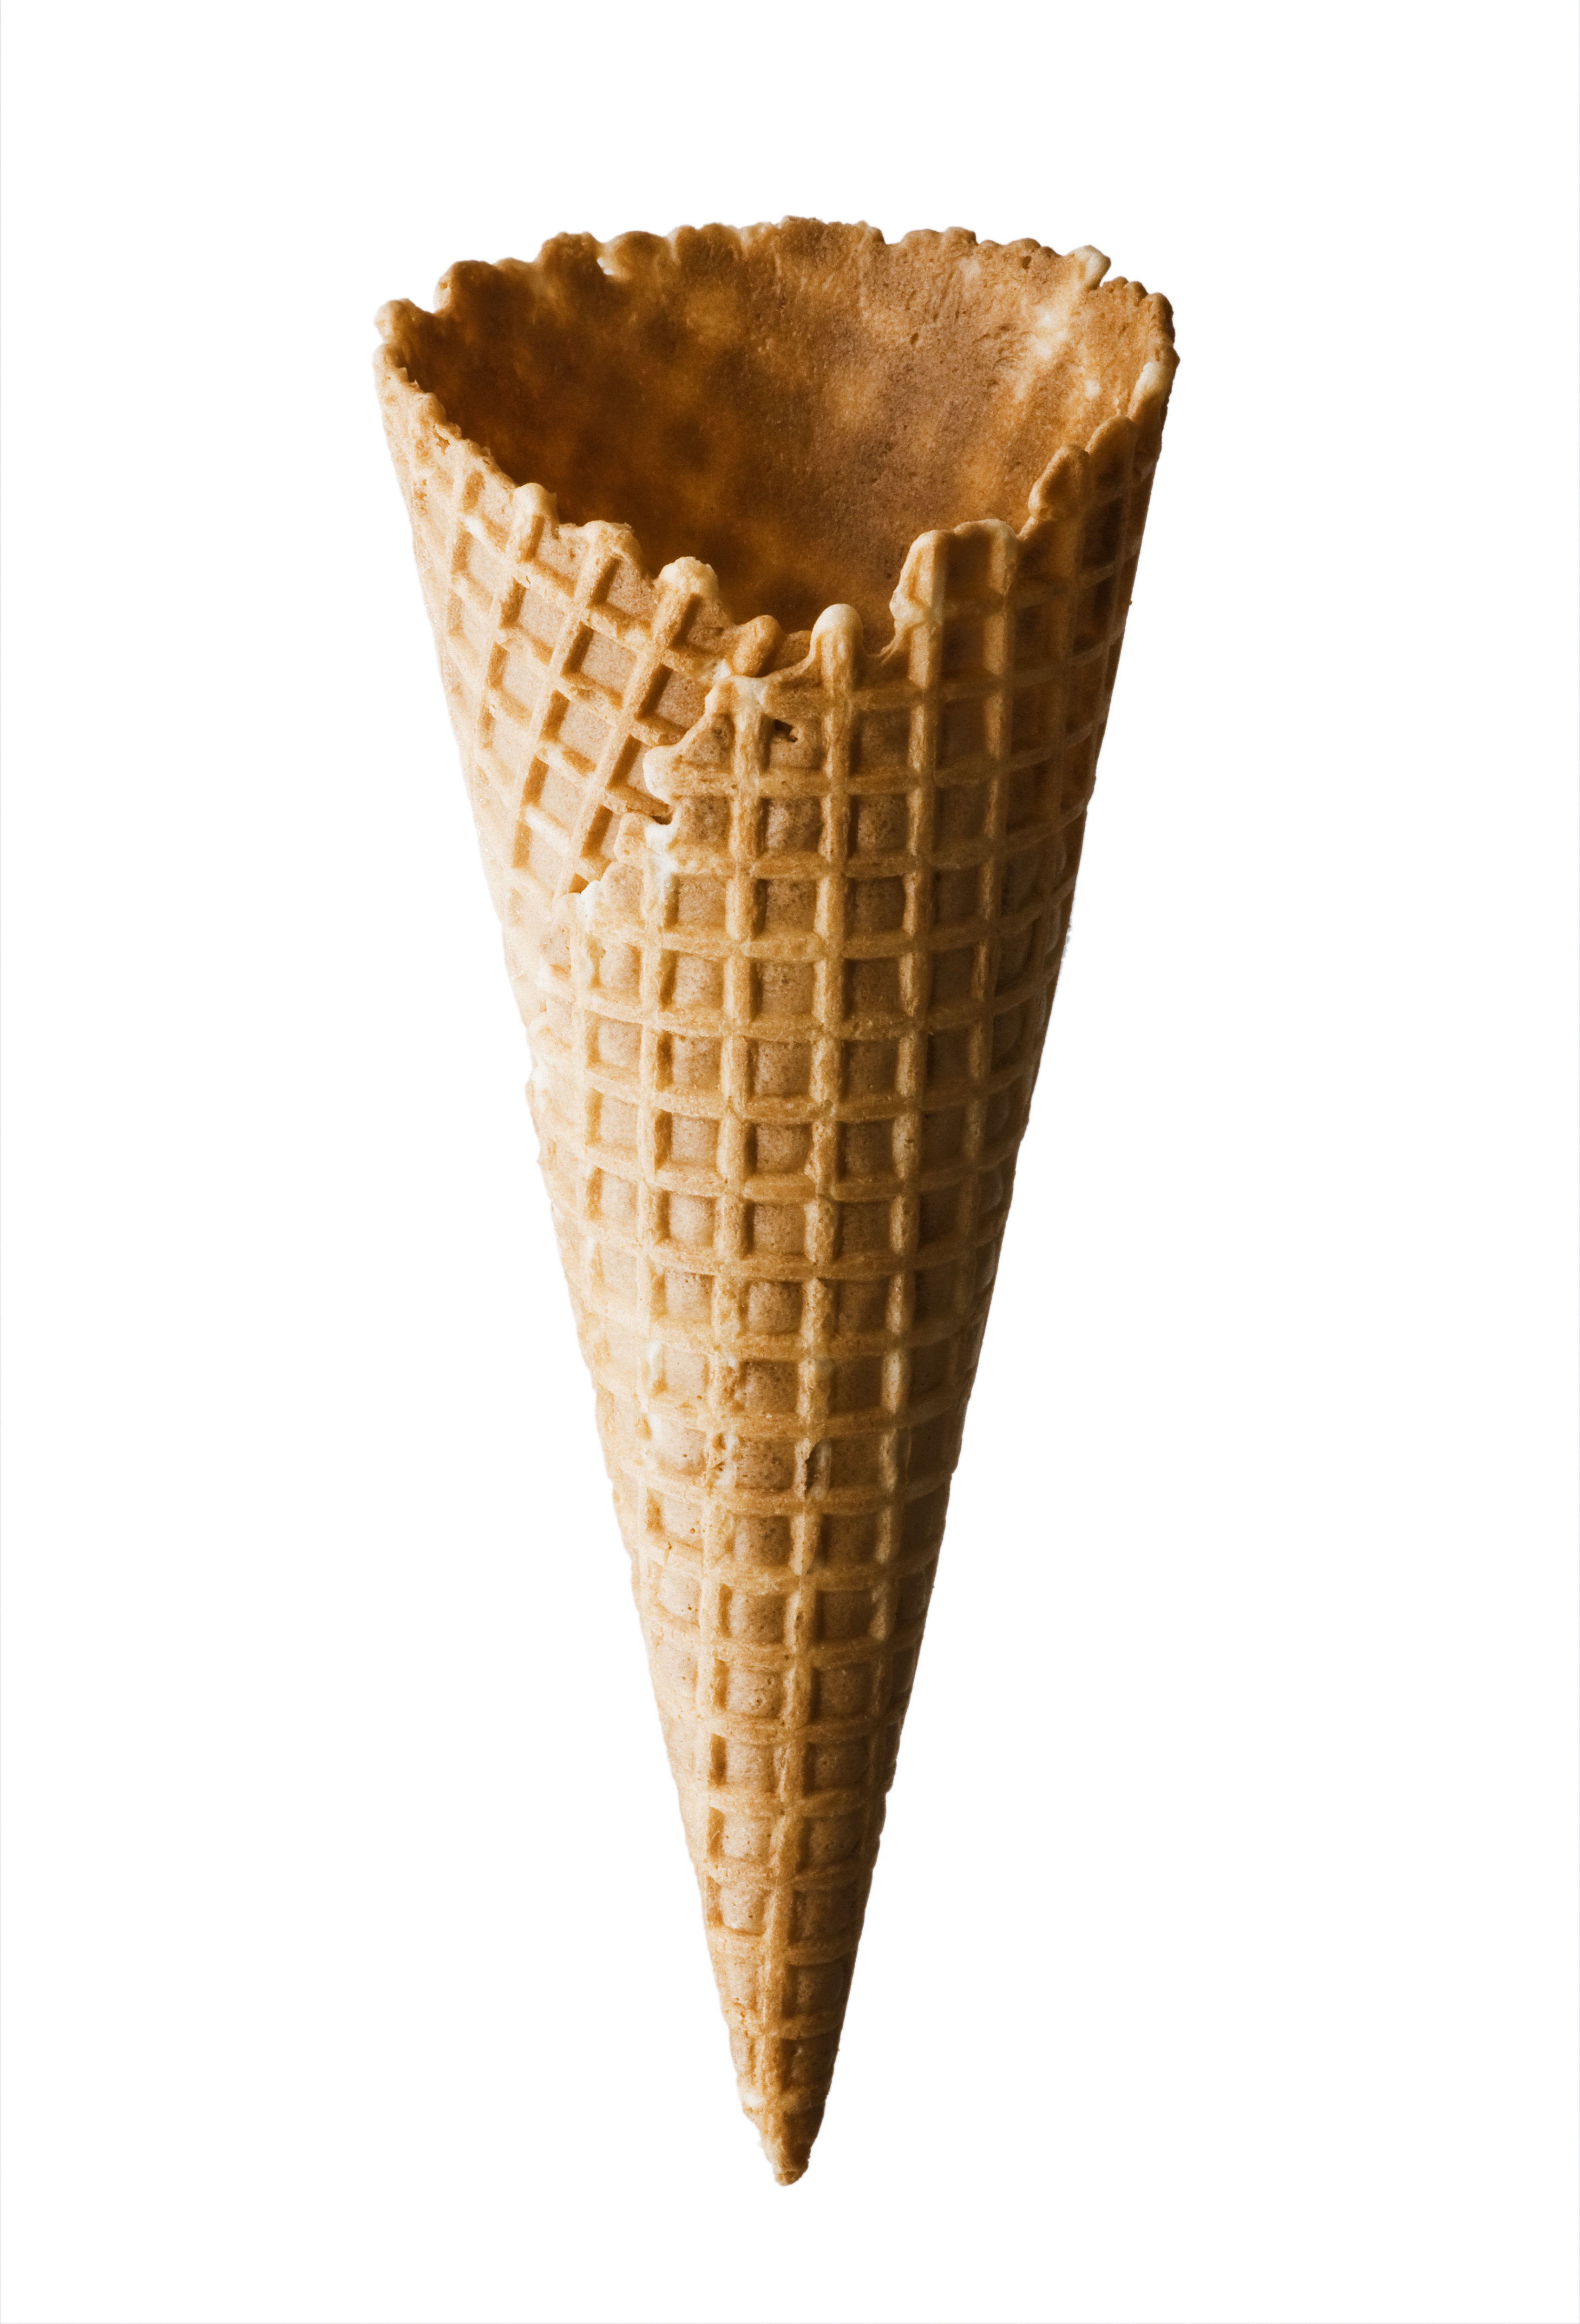 Waffle Cone Png - Scandinavian Waffle Cones, Transparent background PNG HD thumbnail